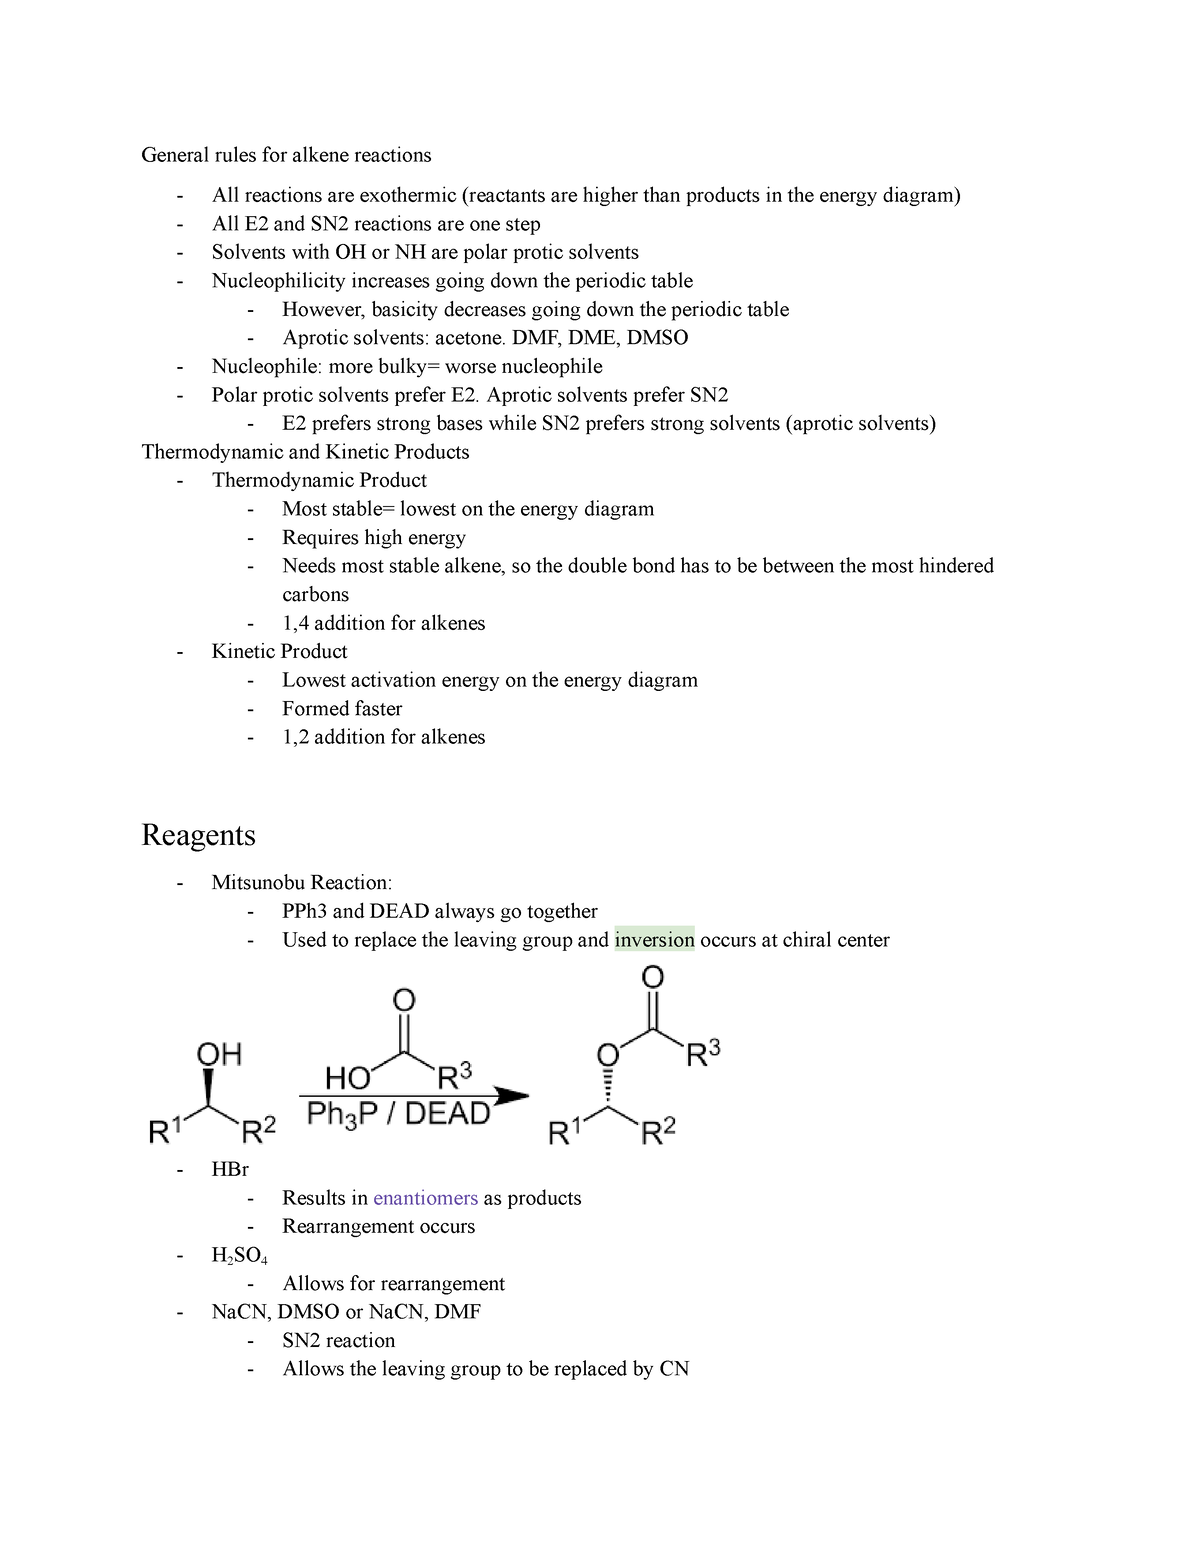 notes-3-general-rules-for-alkene-reactions-all-reactions-are